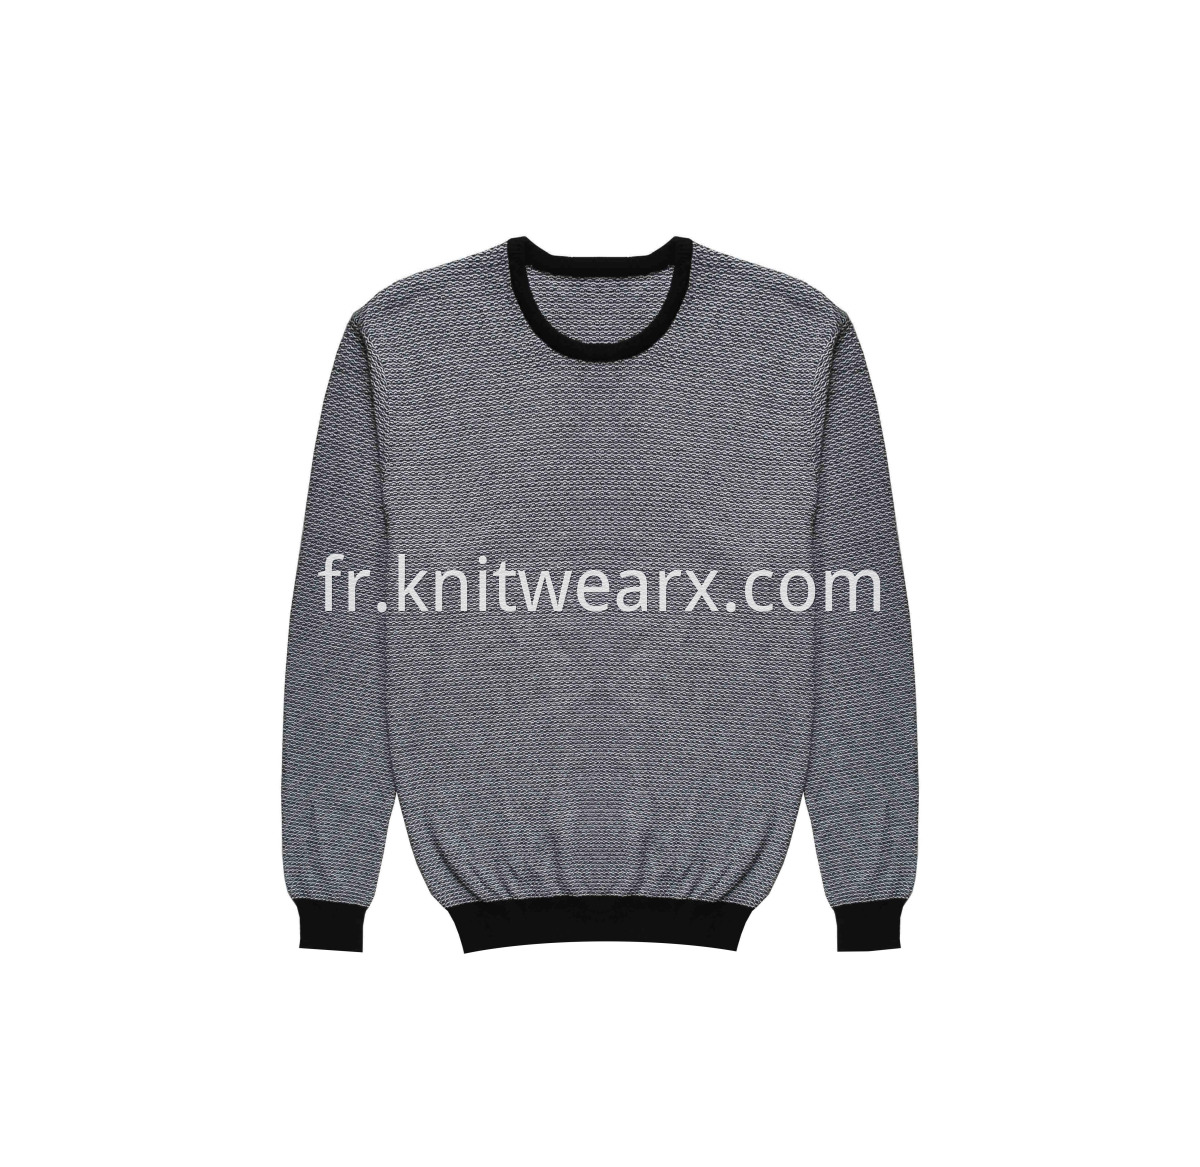 Men's Classic Knitted Purl Stitch Sweater Crewneck Pullover